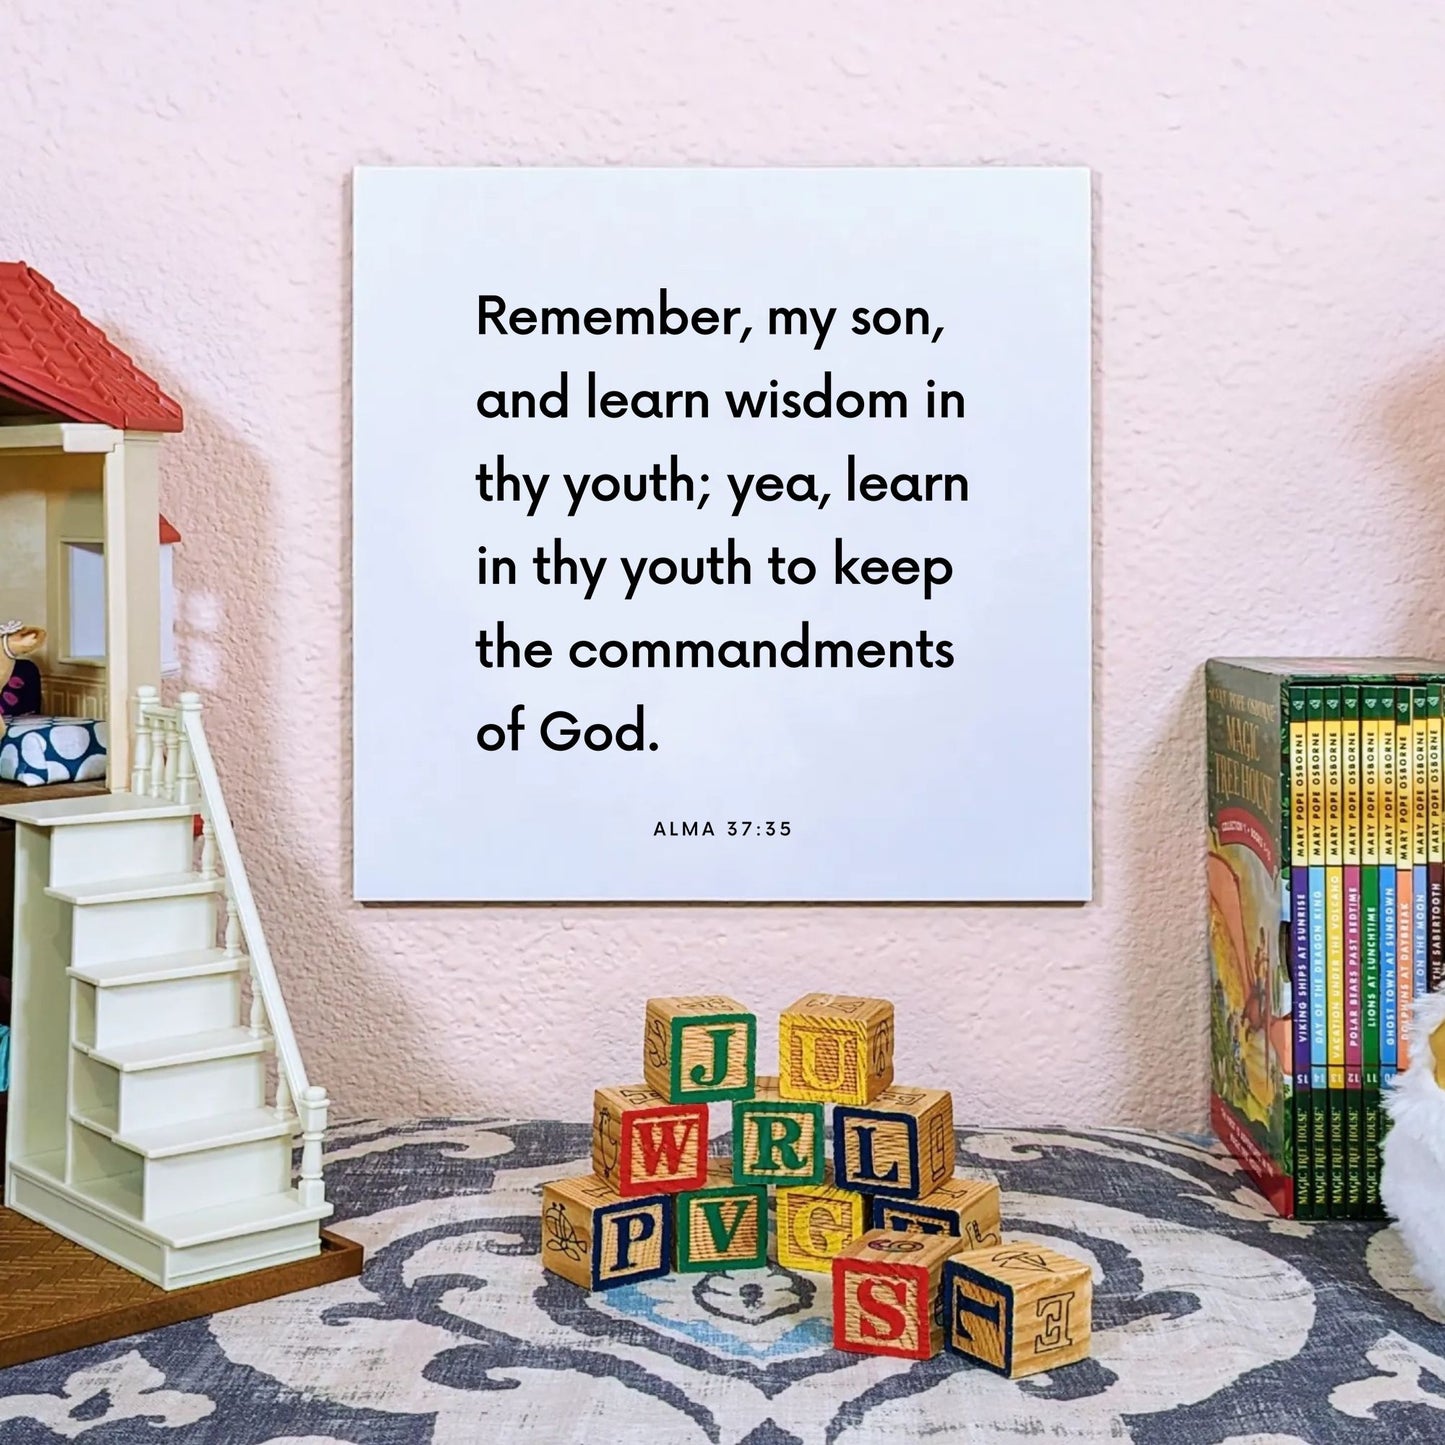 Playroom mouting of the scripture tile for Alma 37:35 - "Remember, my son, and learn wisdom in thy youth"